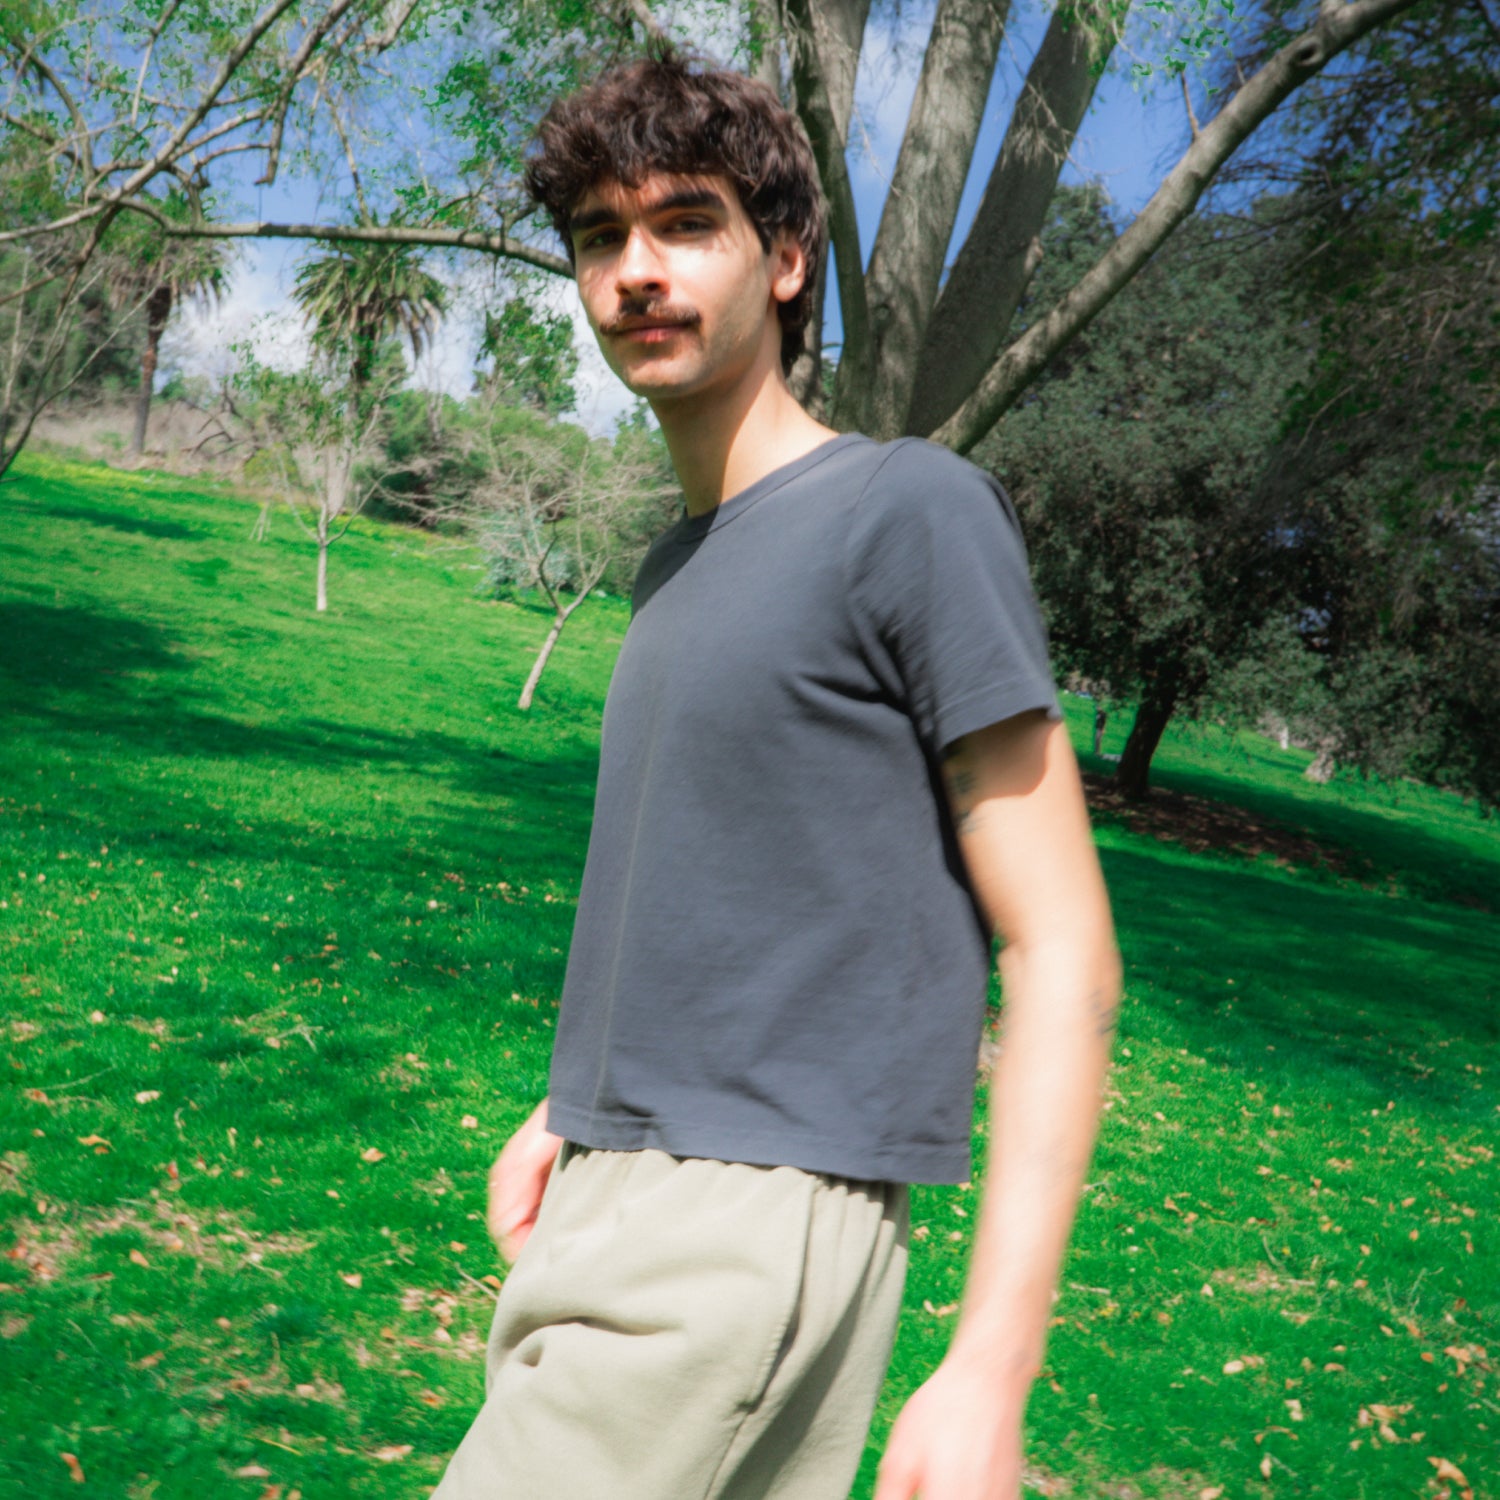 A young man with a slight beard walks in a sunny park with green grass and trees in the background wearing the tailored trash tee